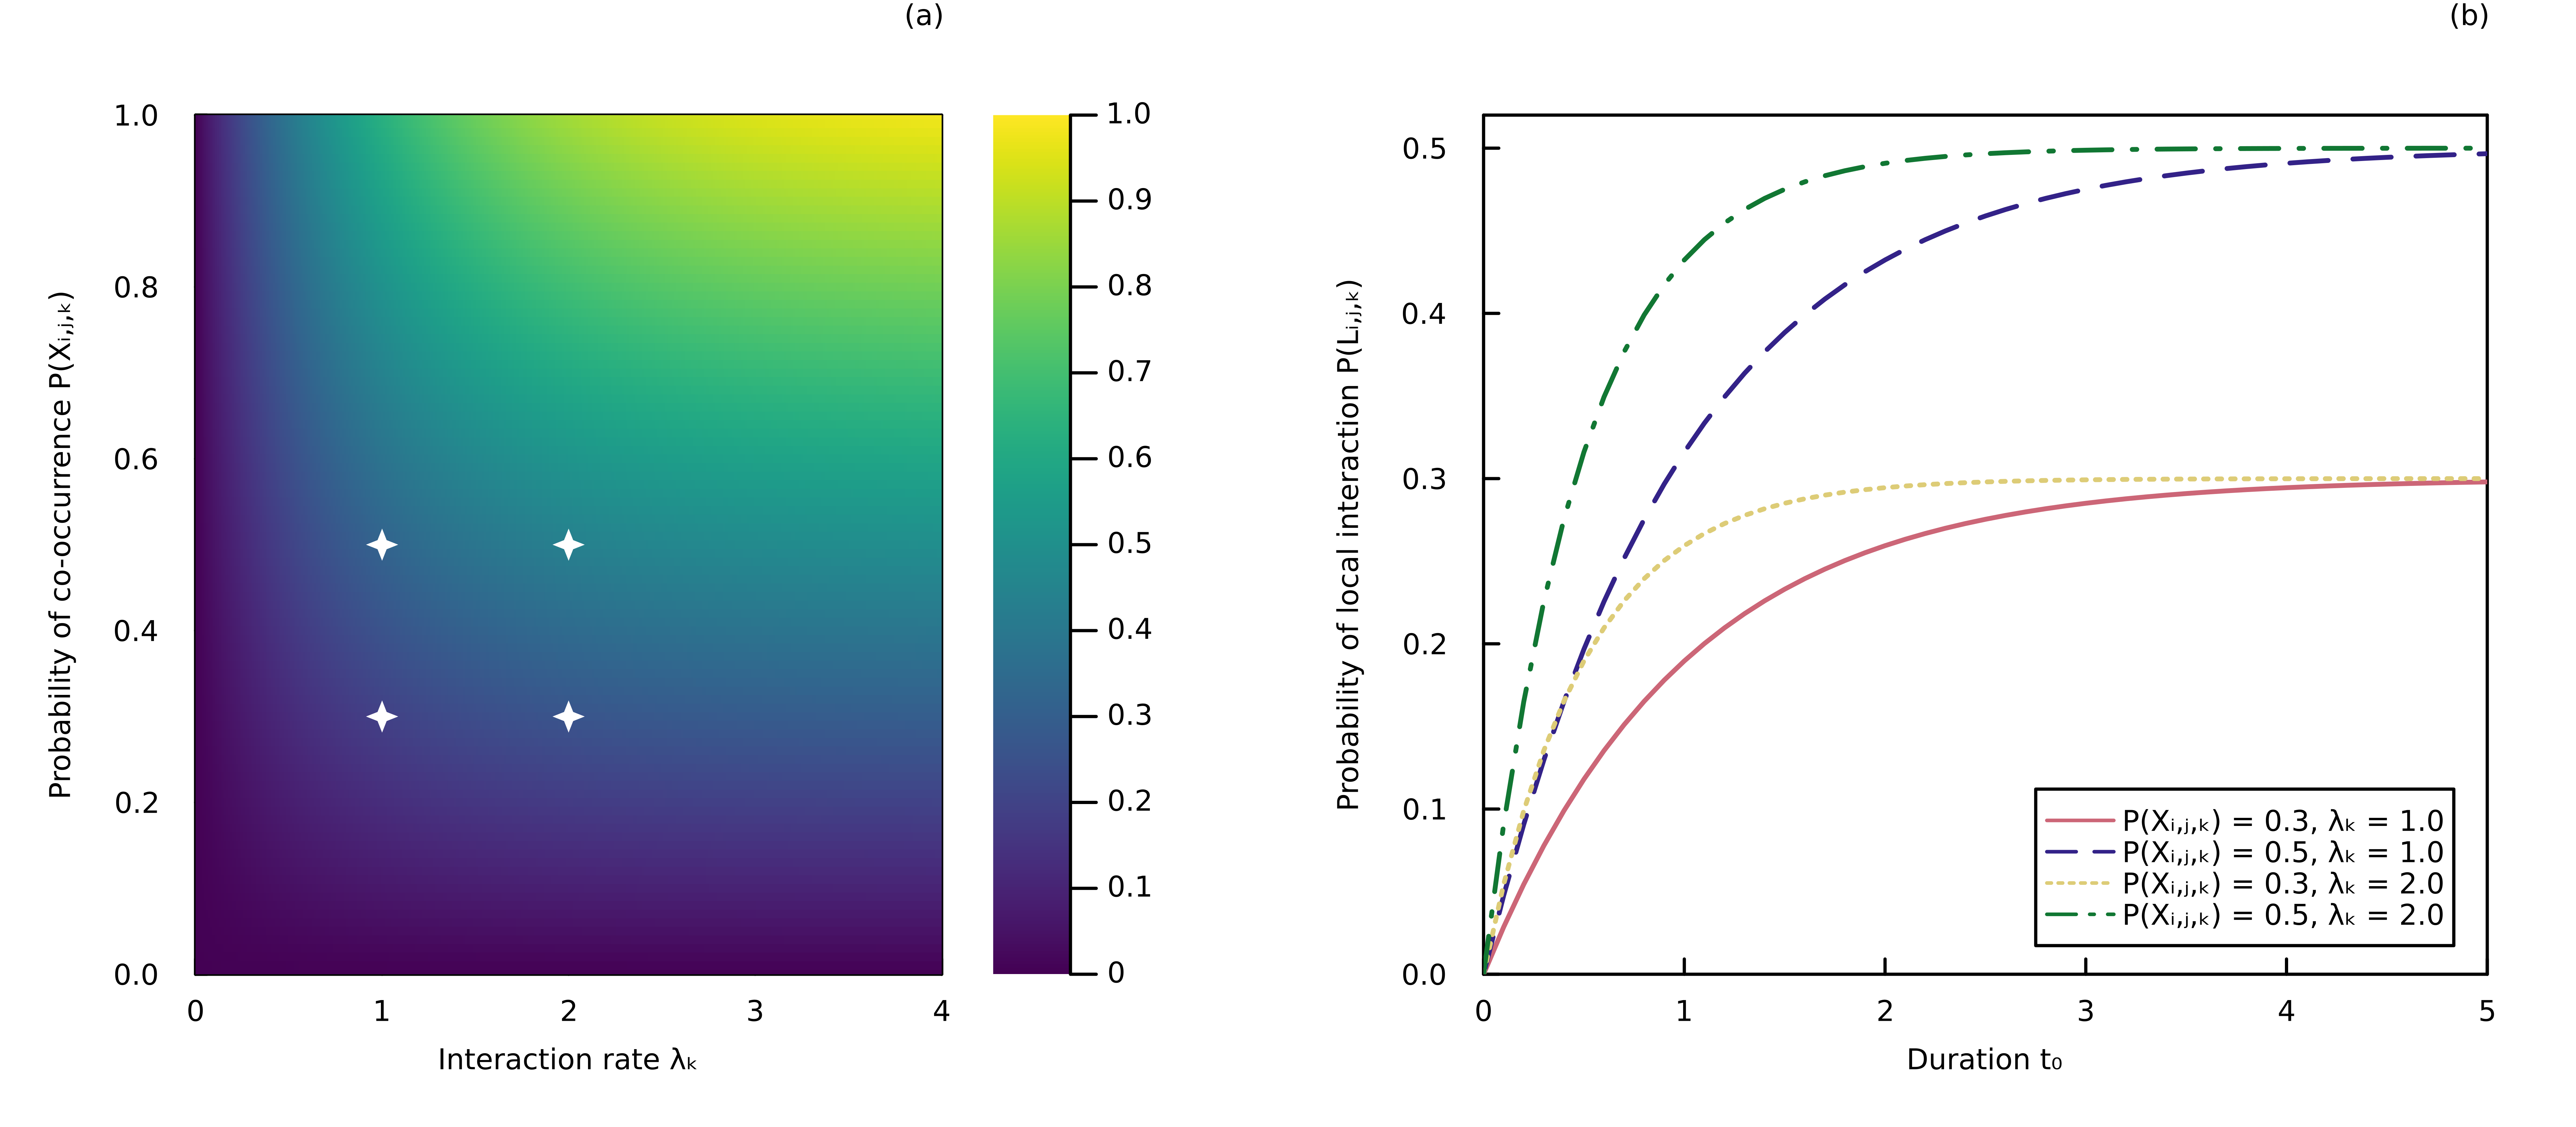 Figure 1: Parameters of the spatiotemporally explicit model of interactions. (a) Probability of local interaction given by the process model (Eq. 8) under different values of \lambda_k (interaction rate) and P(X_{i,j,k}) (probability of co-occurrence), with t_0 = 1 (duration). Parameters t_0 and \lambda_k have complementary units (e.g., t_0 in months and \lambda_k in number of interactions per month). The parameter values used in the right panel are denoted by the white stars. (b) Scaling of the probability of interaction with the duration parameter t_0, for different values of \lambda_k and P(X_{i,j,k}).